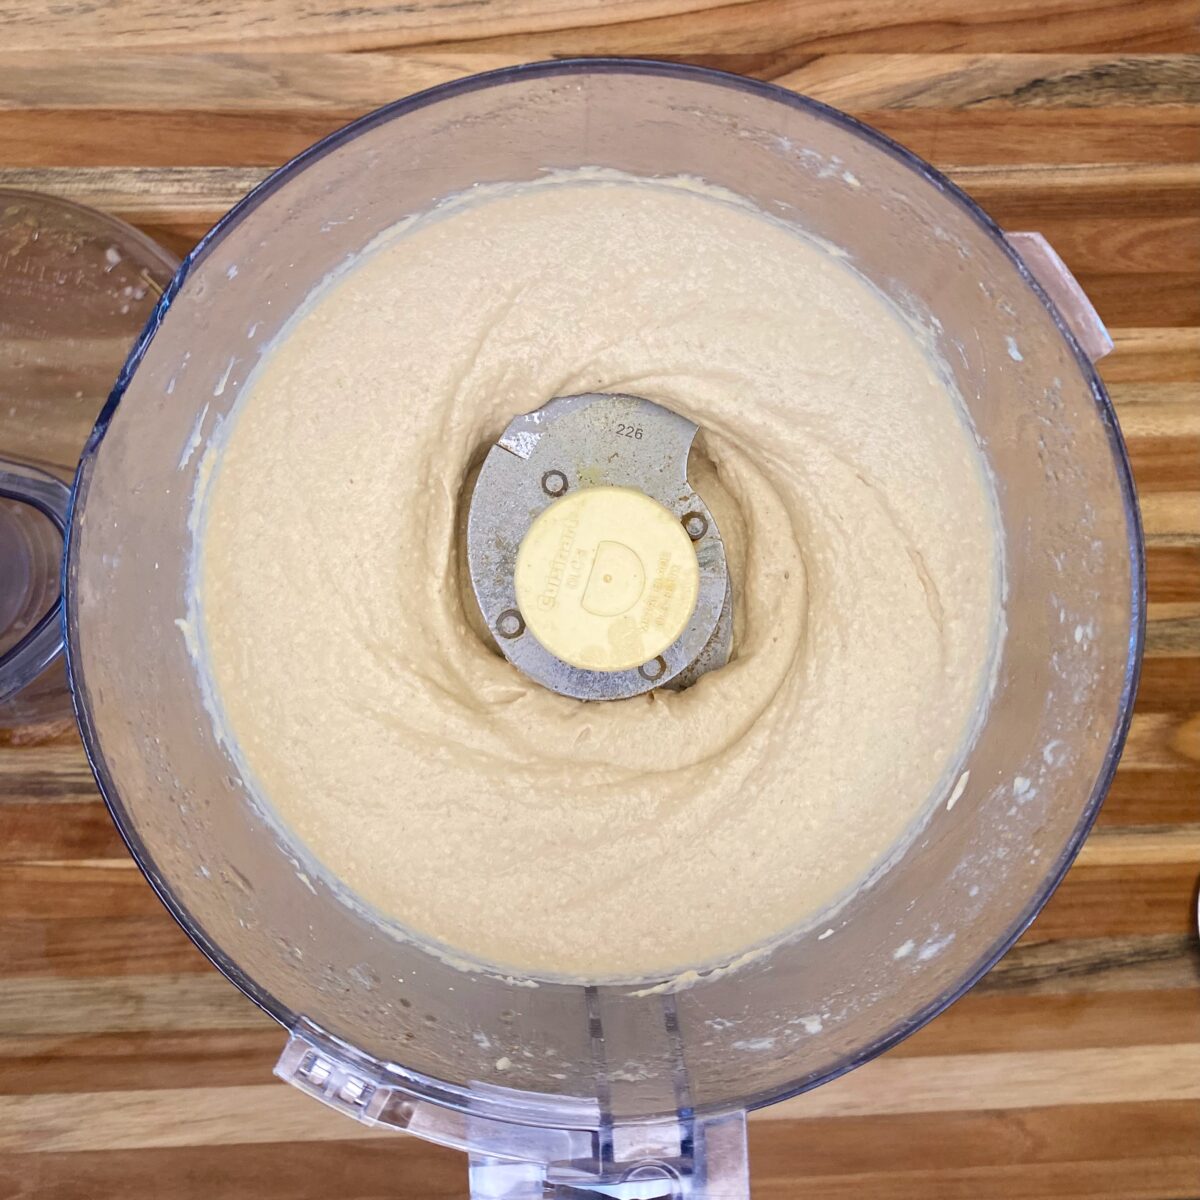 After three minutes of processing, the hummus is smooth and creamy, and ready for a flavor check.